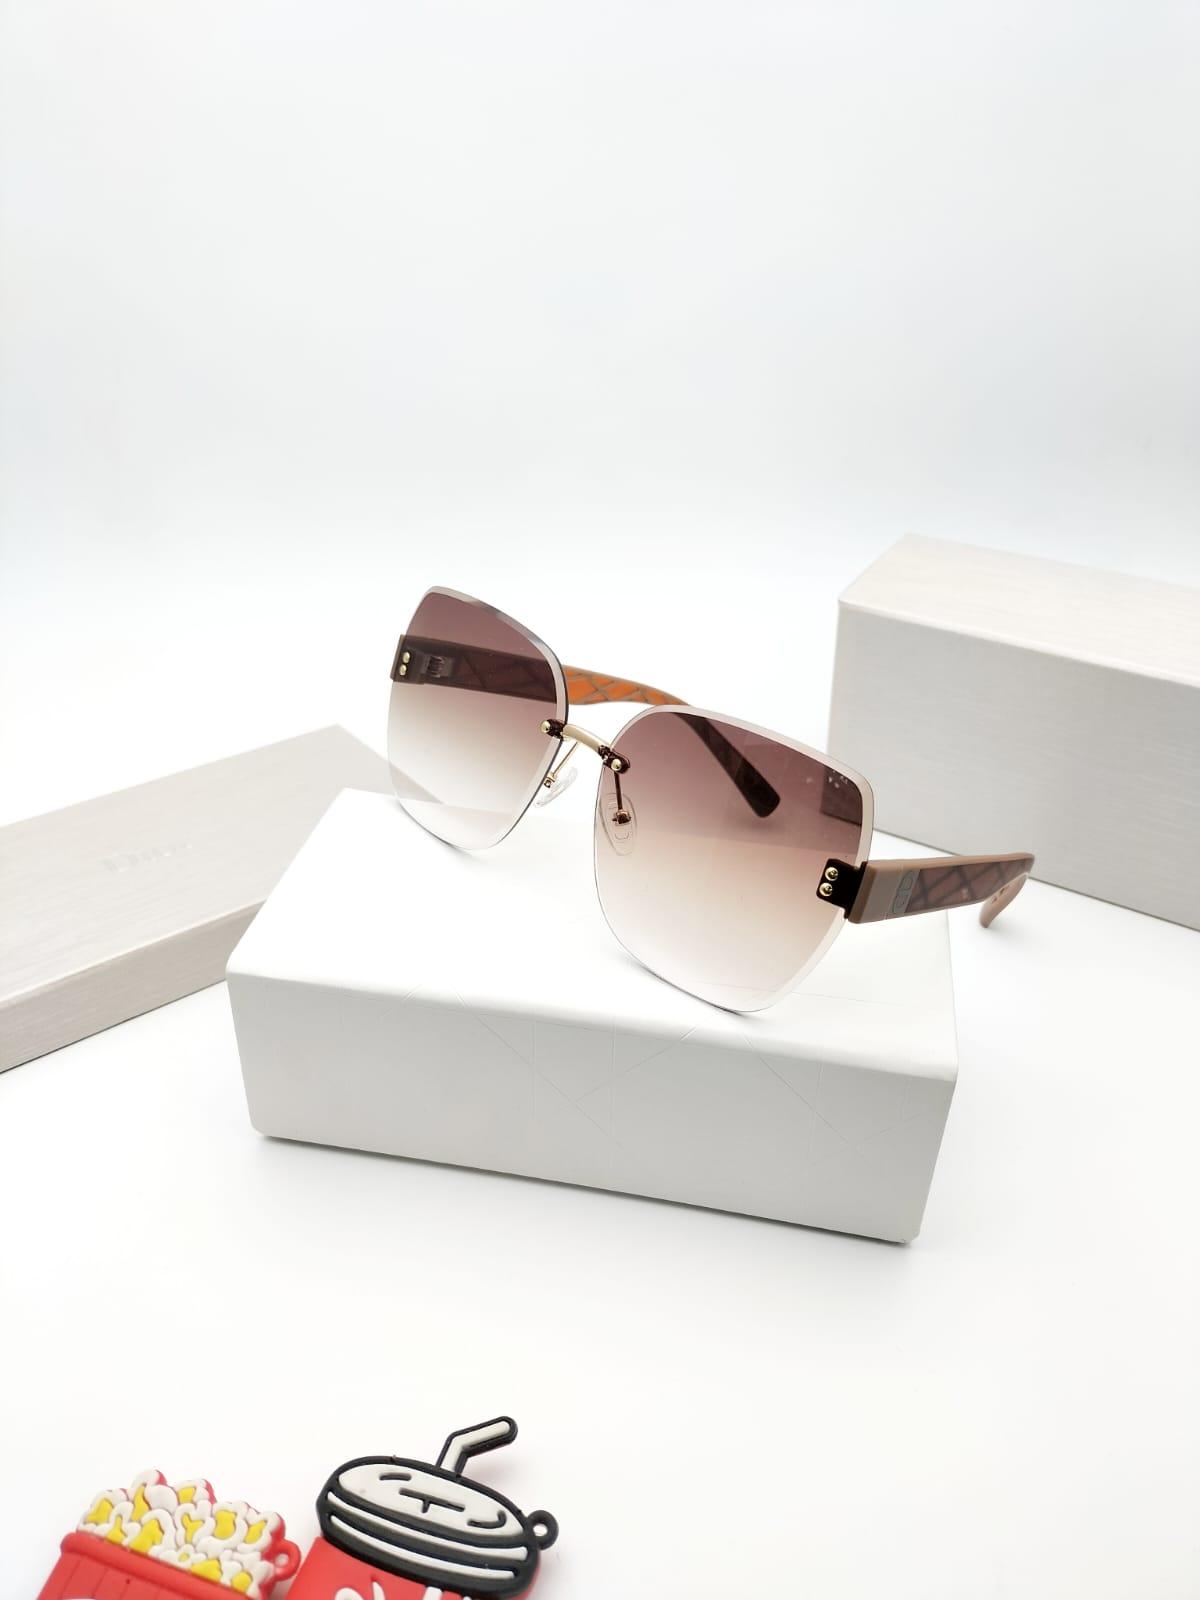 DIOR A7002 - Customized Prescription Sunglasses and Spectacles